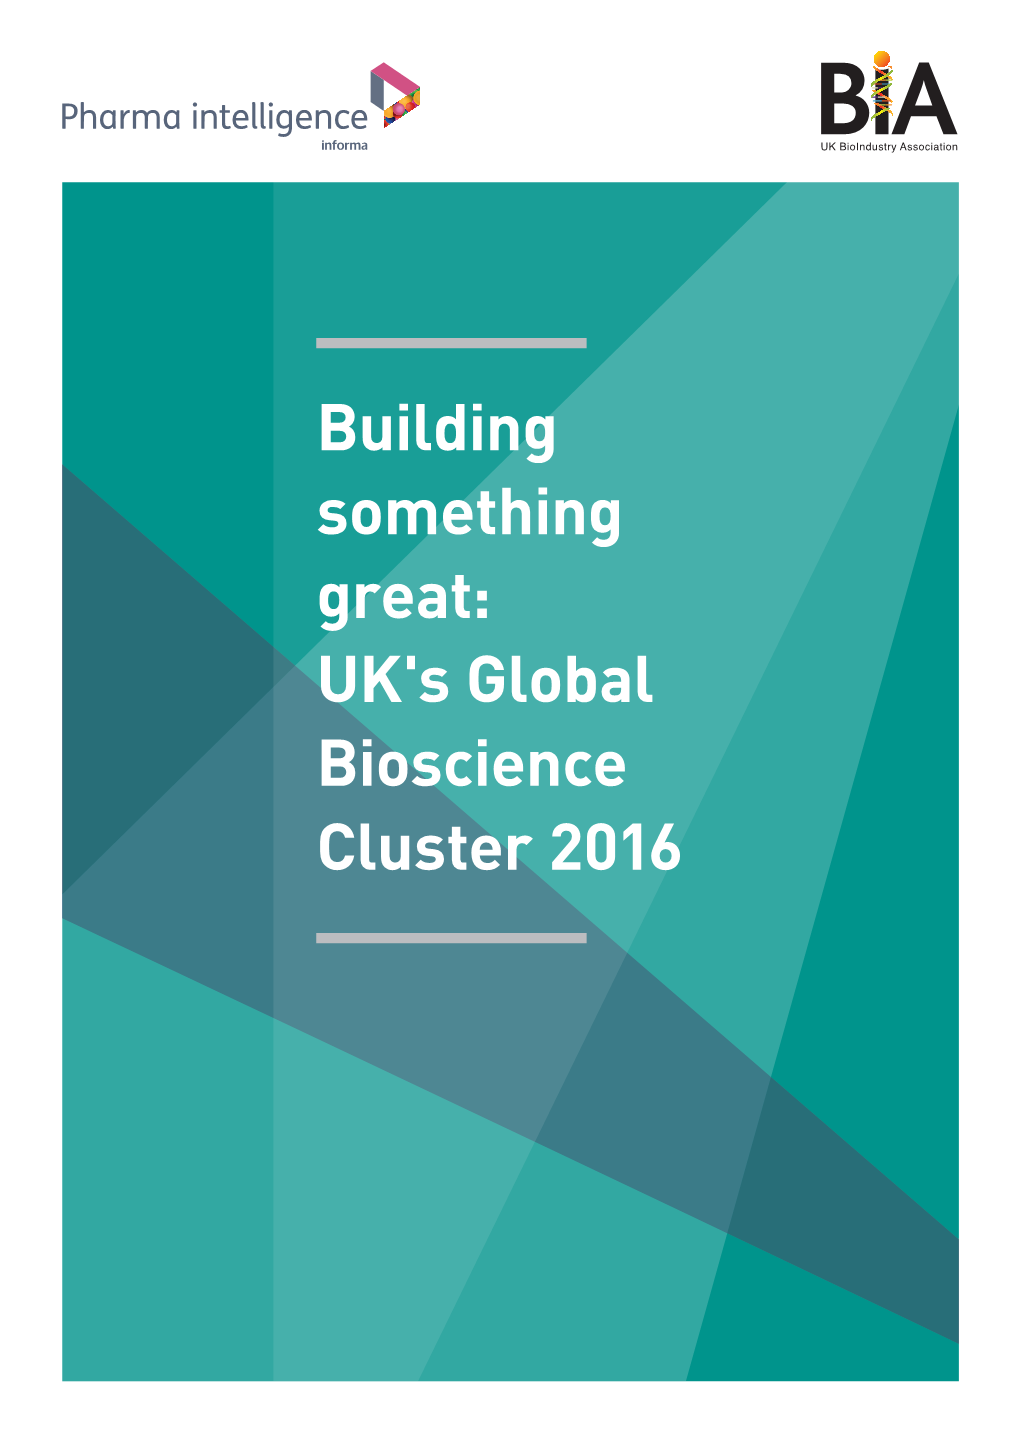 UK's Global Bioscience Cluster 2016 the UK Bioindustry Association: Delivering the Best Possible Environment for Biotechnology Growth and Innovation